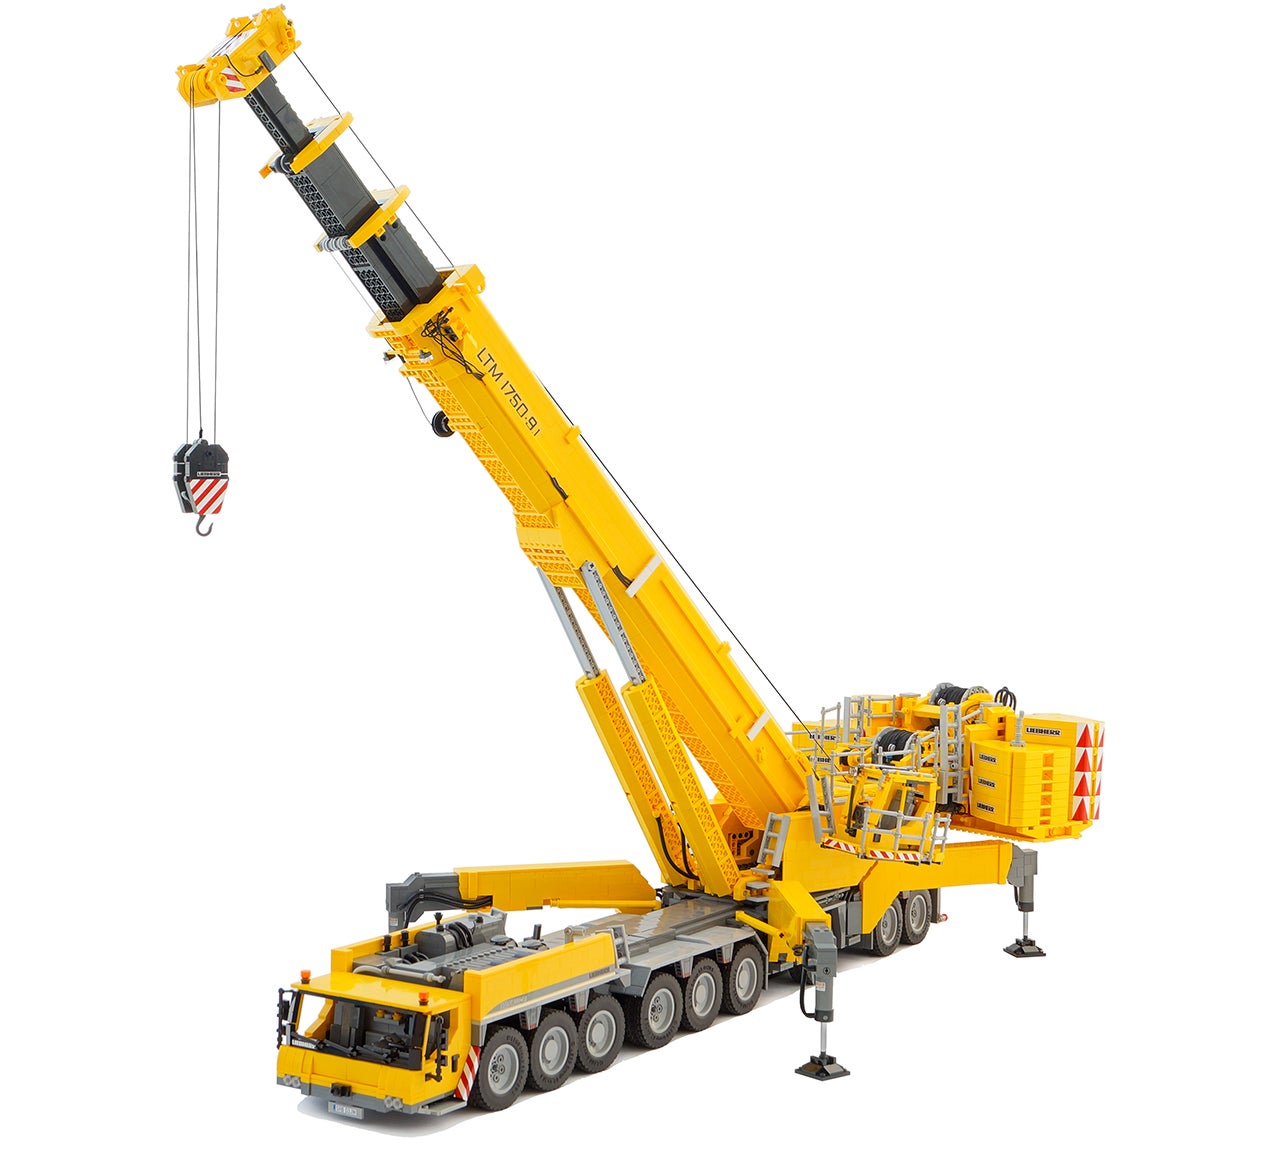 This Working 18Wheel Lego Mobile Crane Is a StraightUp Masterpiece